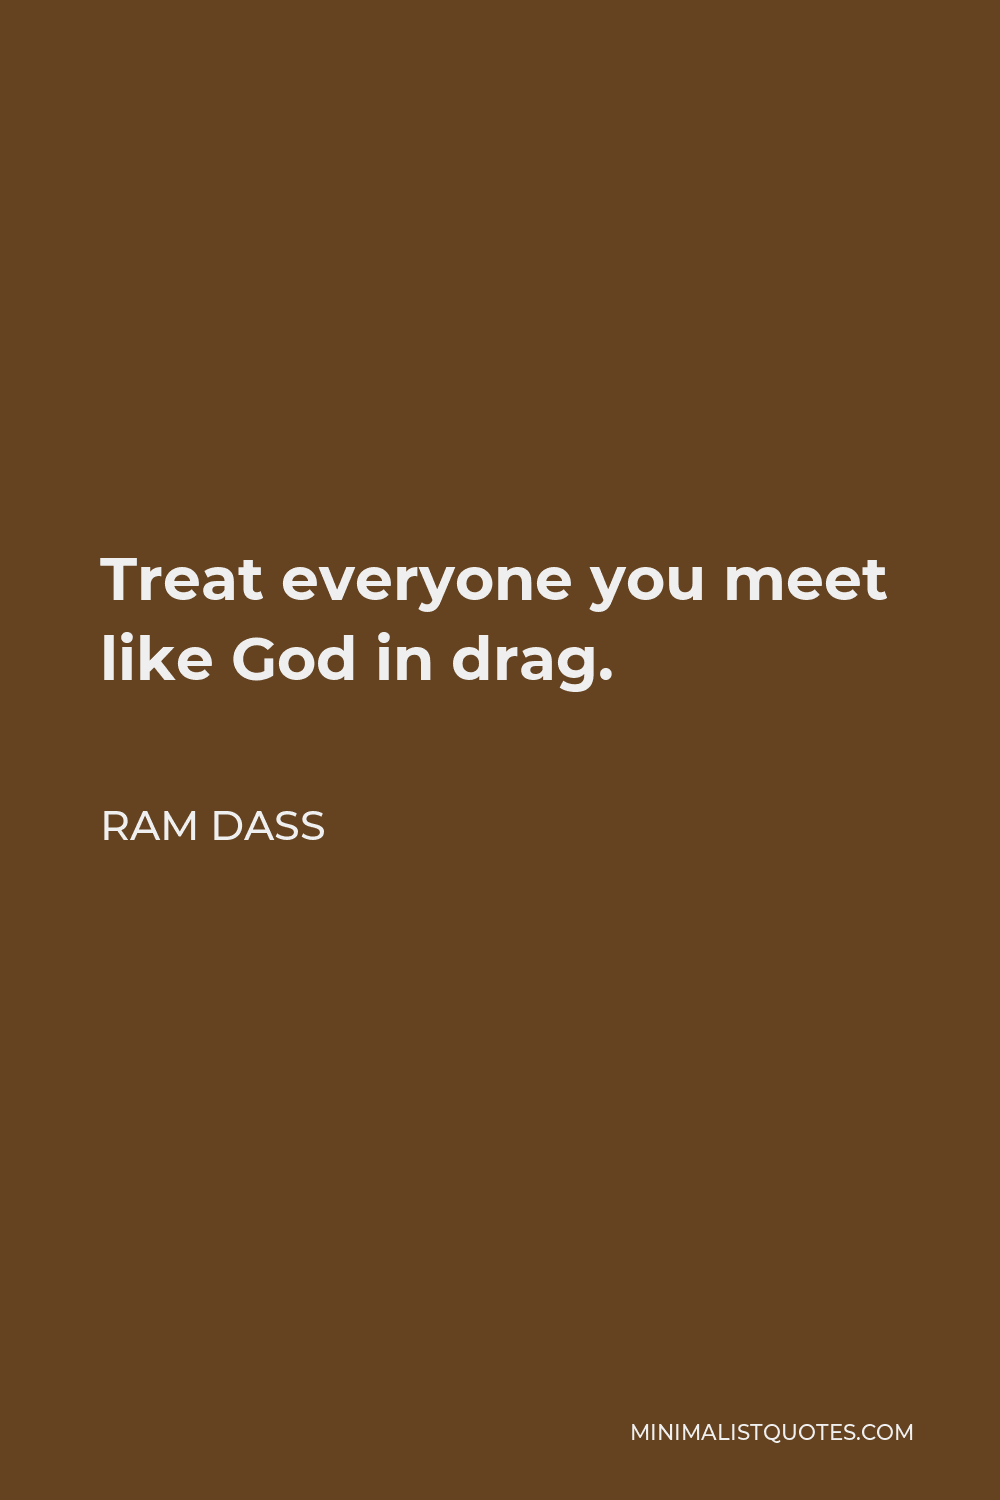 Ram Dass Quote - Treat everyone you meet like God in drag.